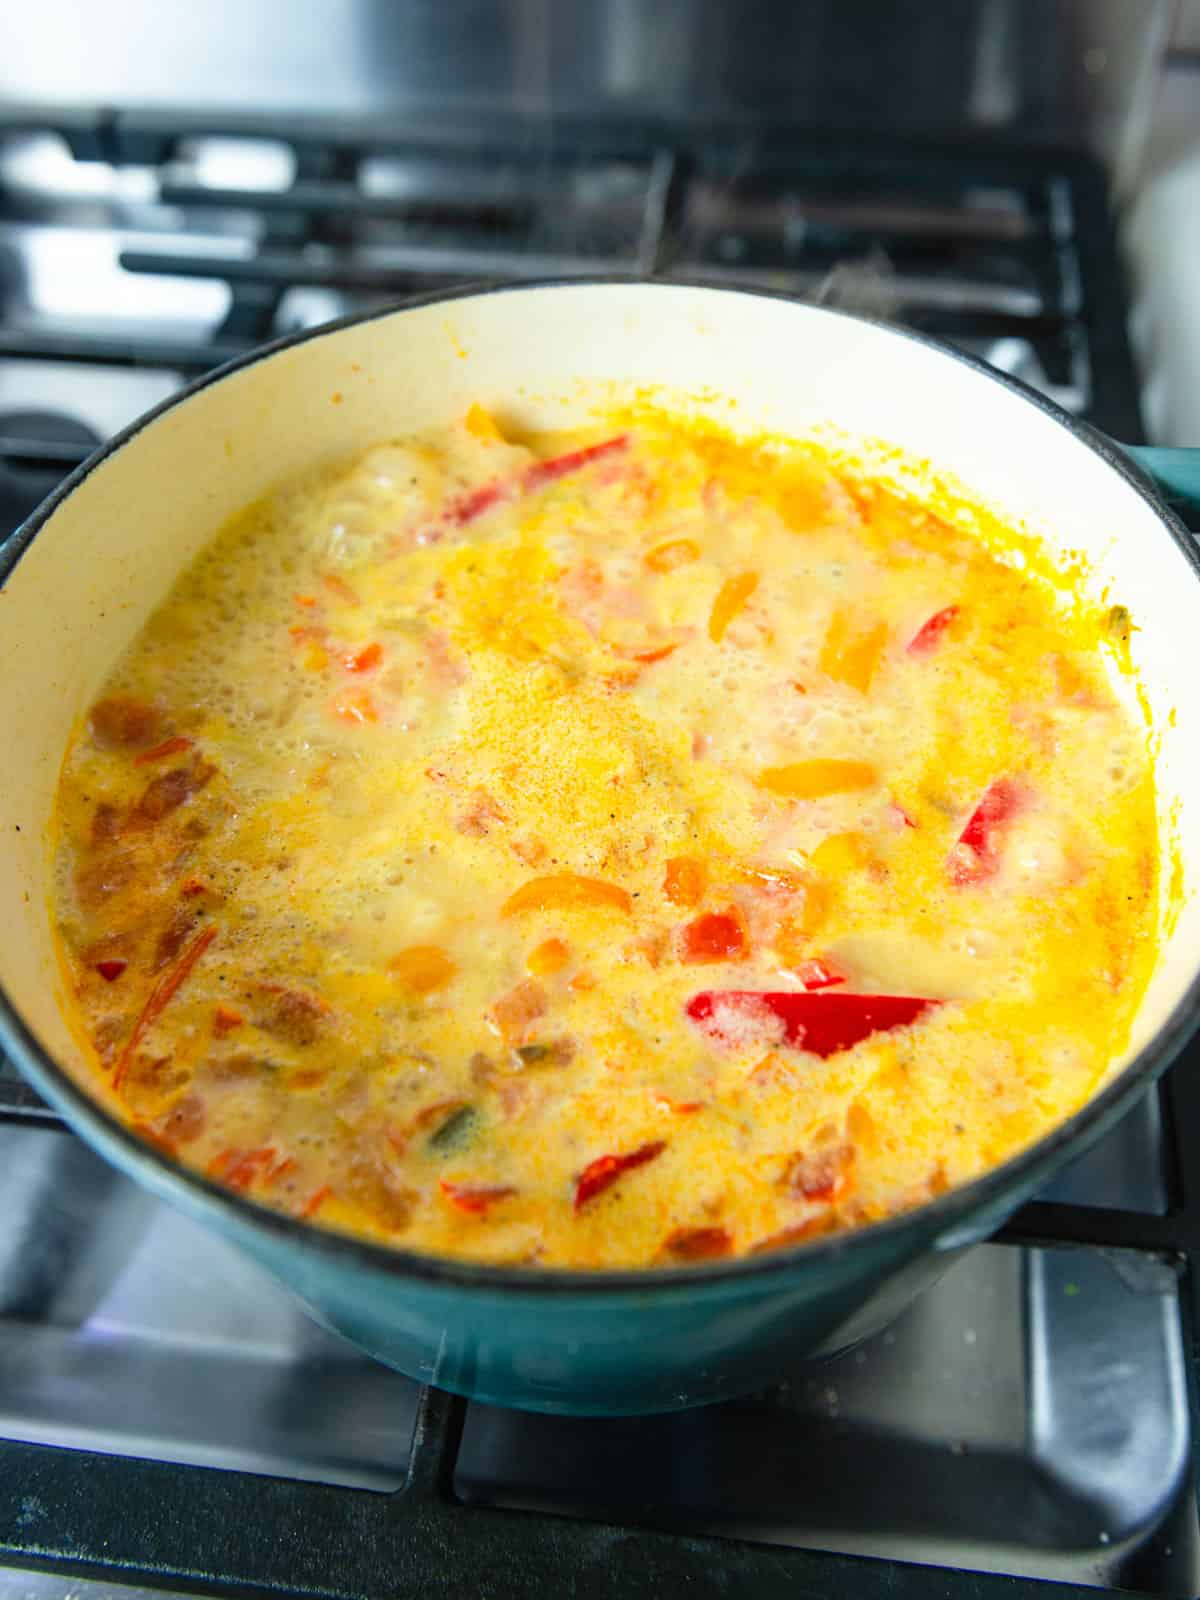 Simmer the moqueca for 15-18 minutes until fish is just cooked through.